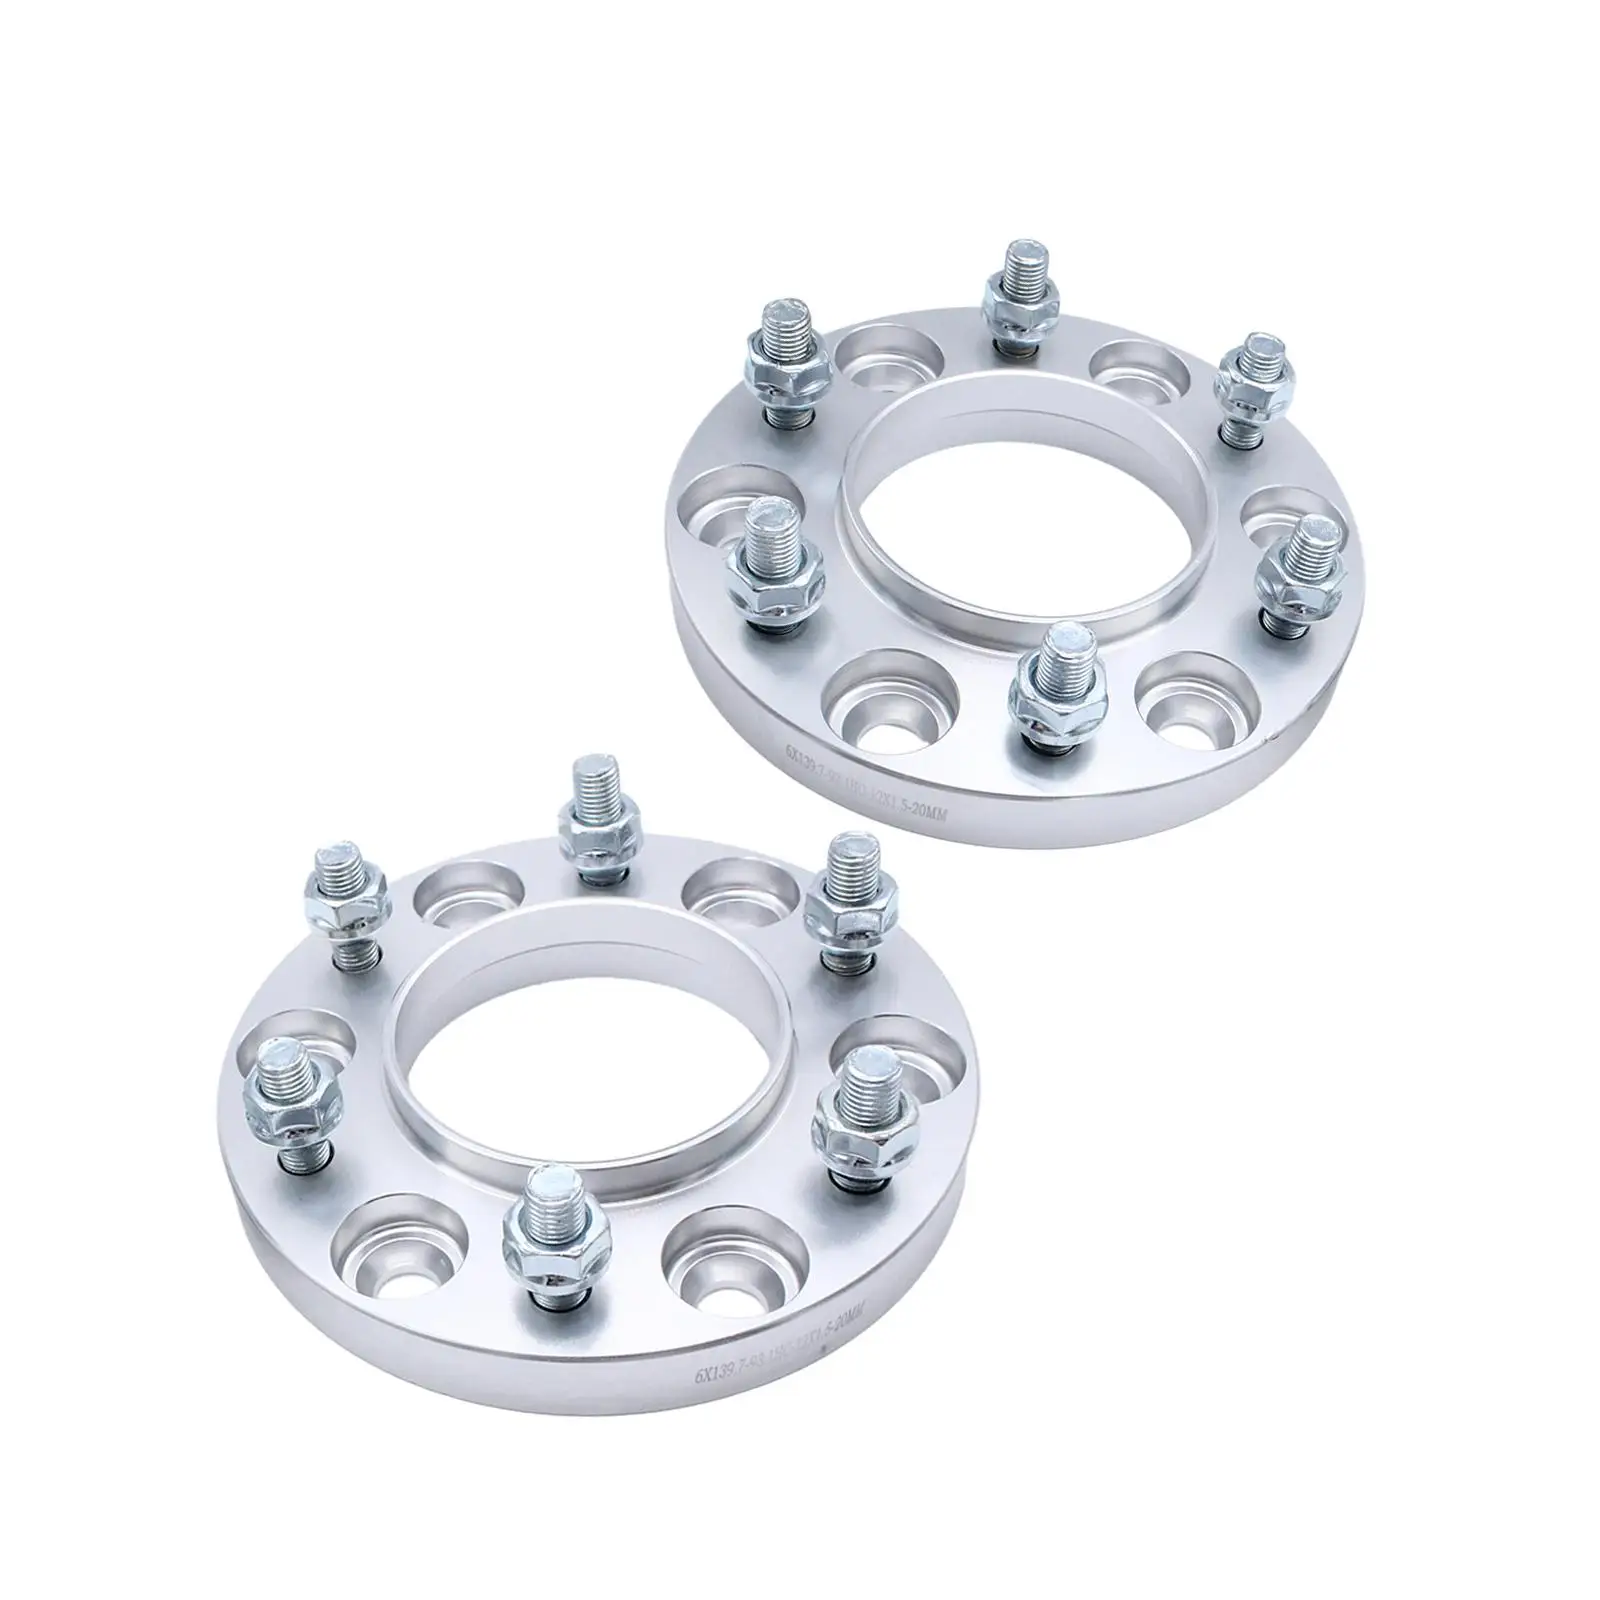 2 Pieces Hub Centric Wheel Spacers 20mm Thickness for Ranger Durable